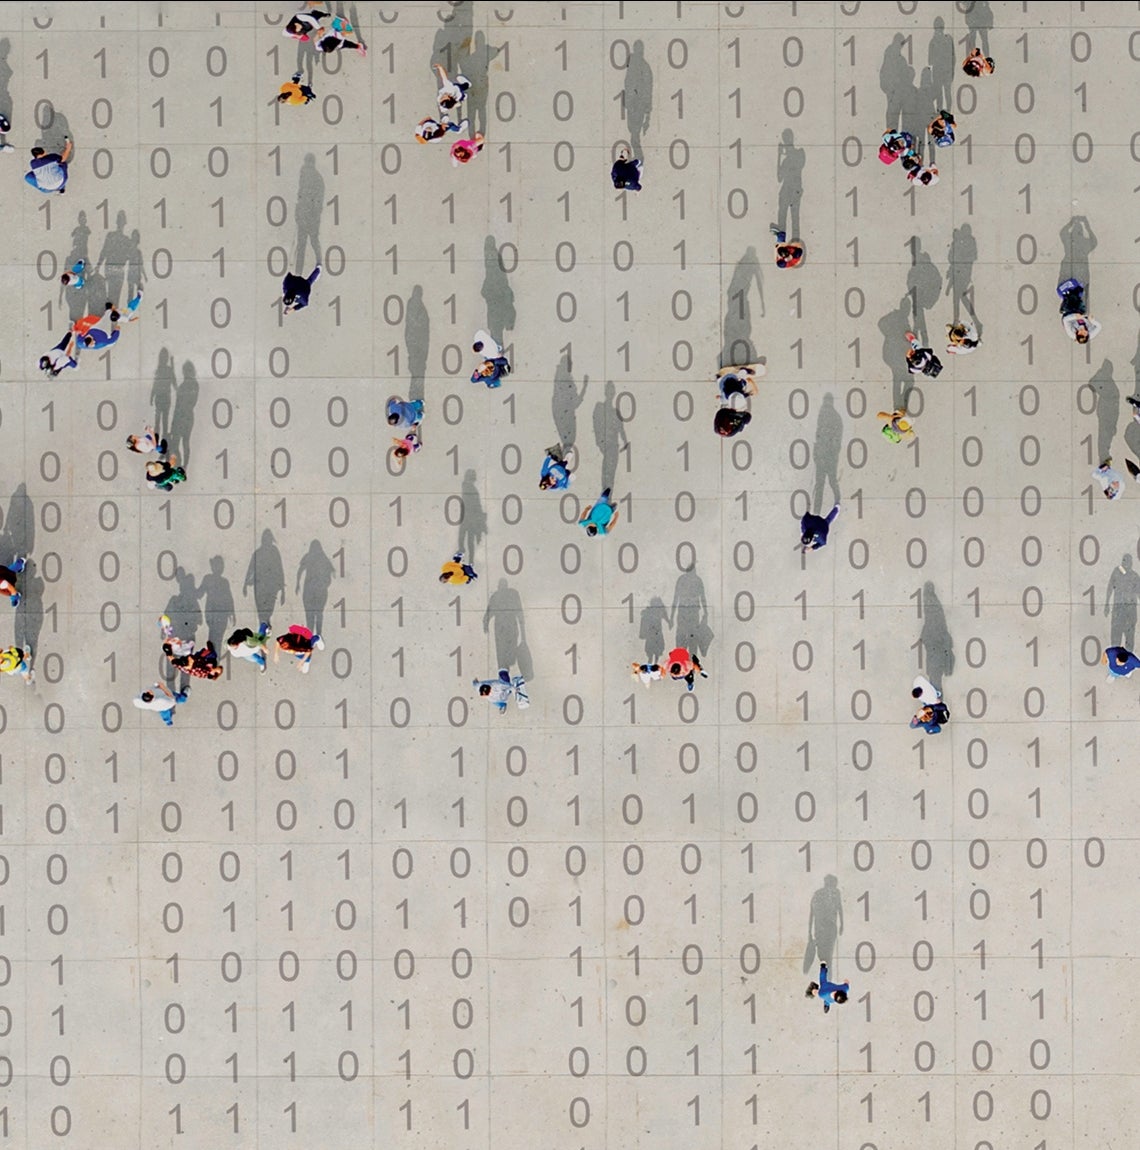 An illustration of people walking over binary numbers